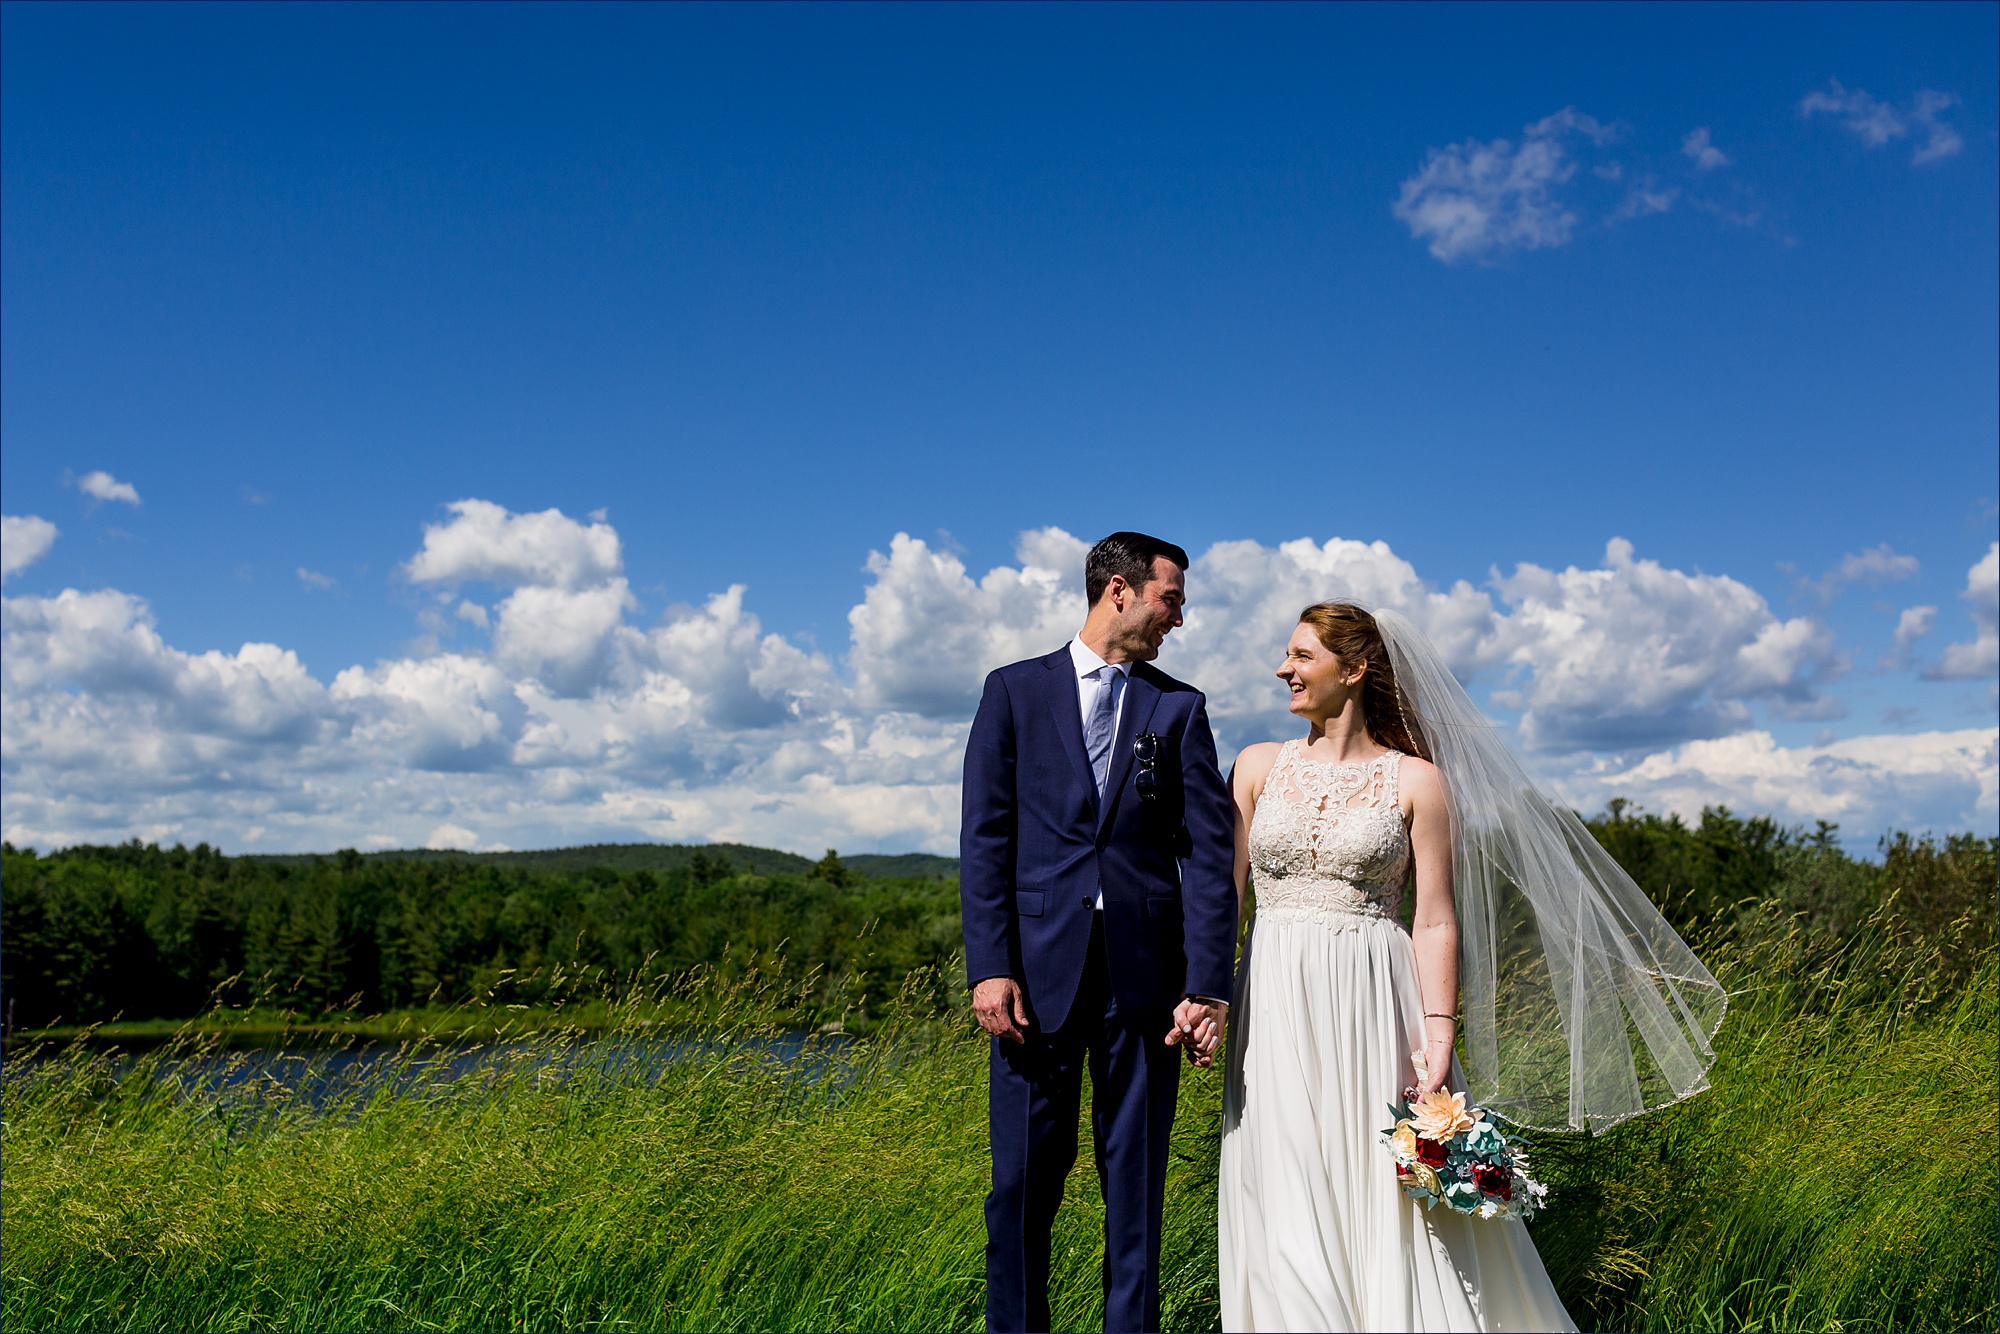 The bride and groom stand close together under a bright blue sky after their NH wedding 